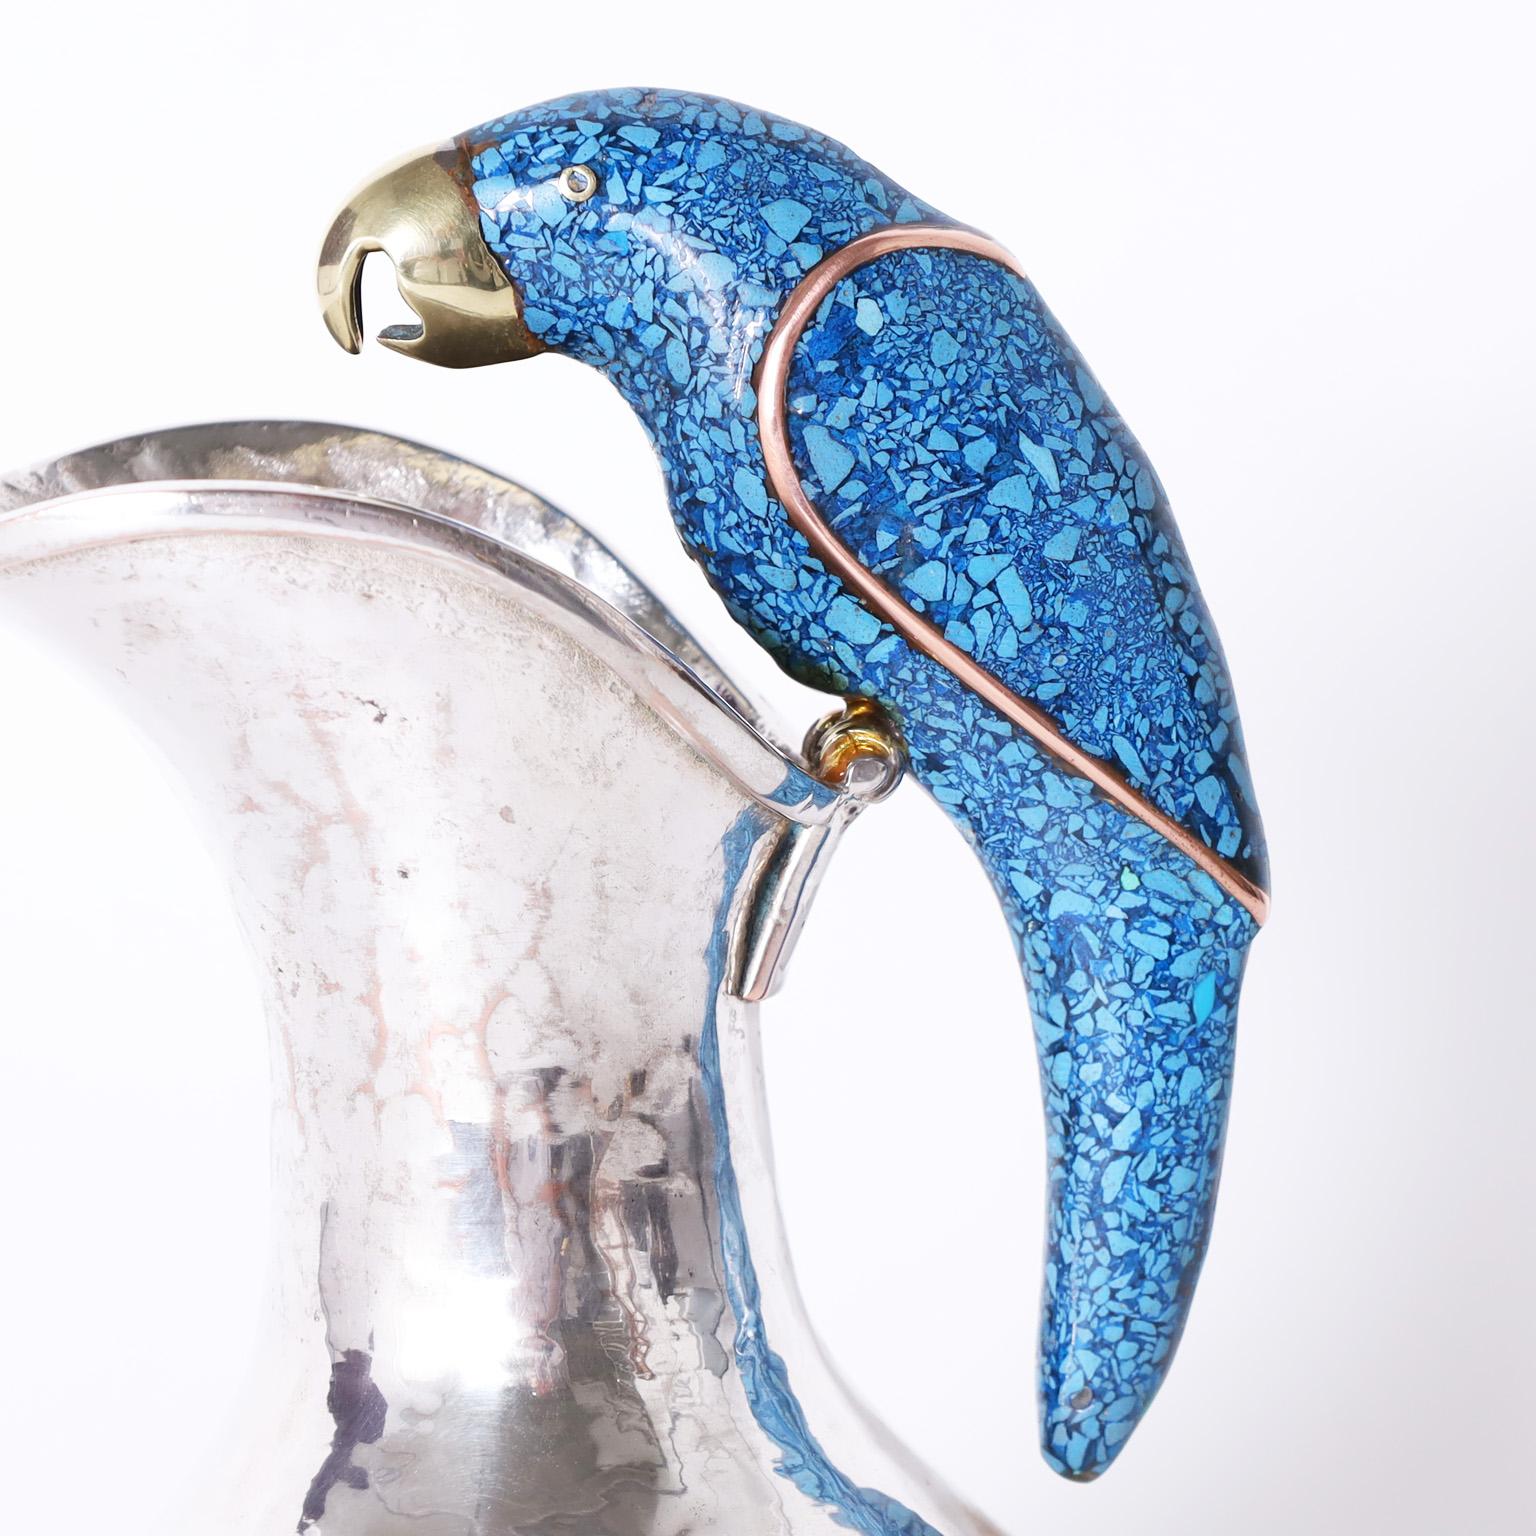 Mexican Silver Plate on Copper Pitcher with Parrot by Emilia Castillo